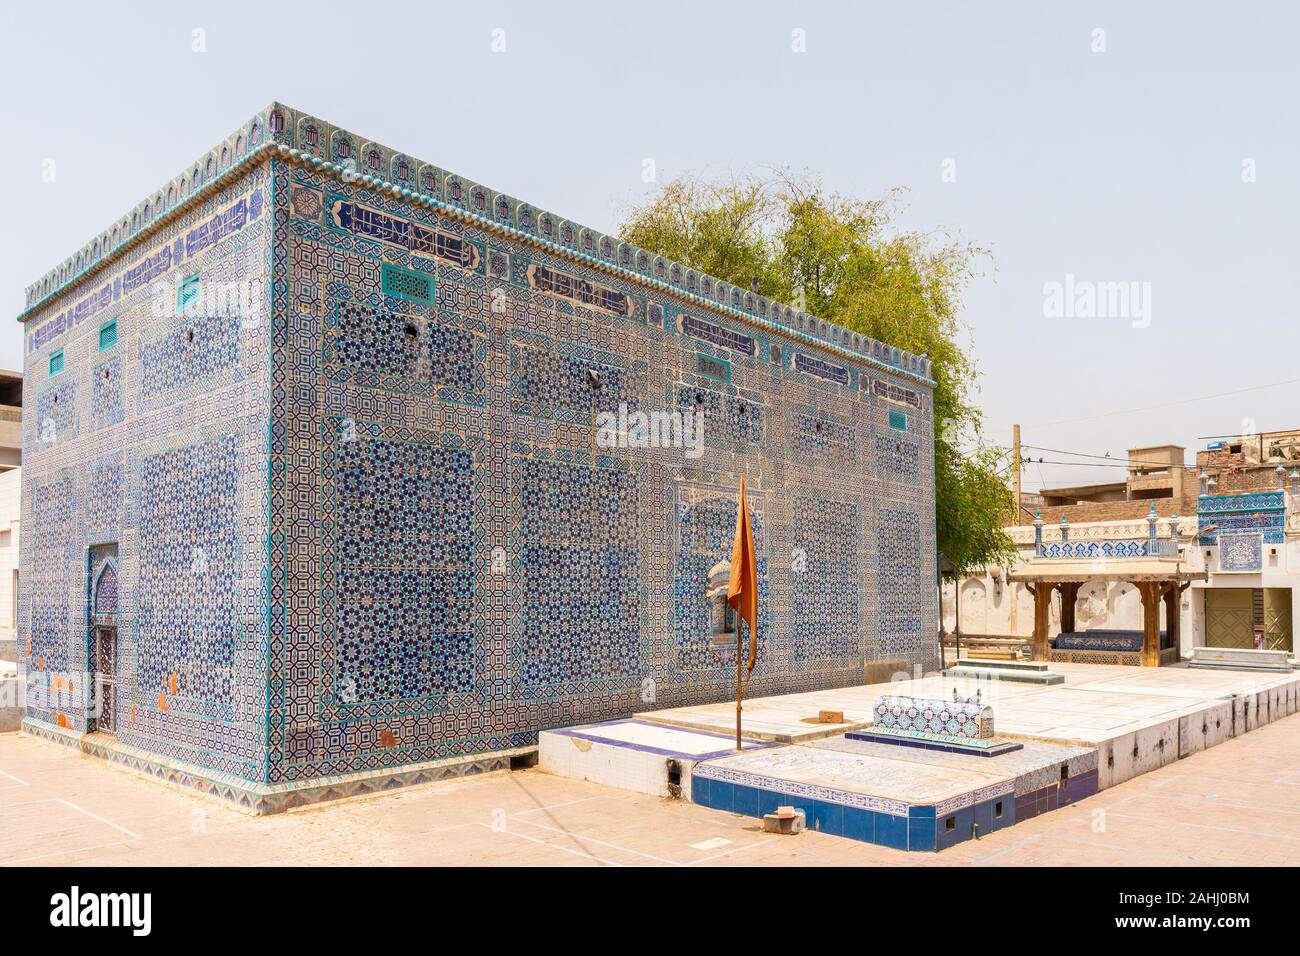 Multan Darbar Hazrat Yousaf Shah Gardez Tomb Picturesque View on a Sunny Blue Sky Day Stock Photo